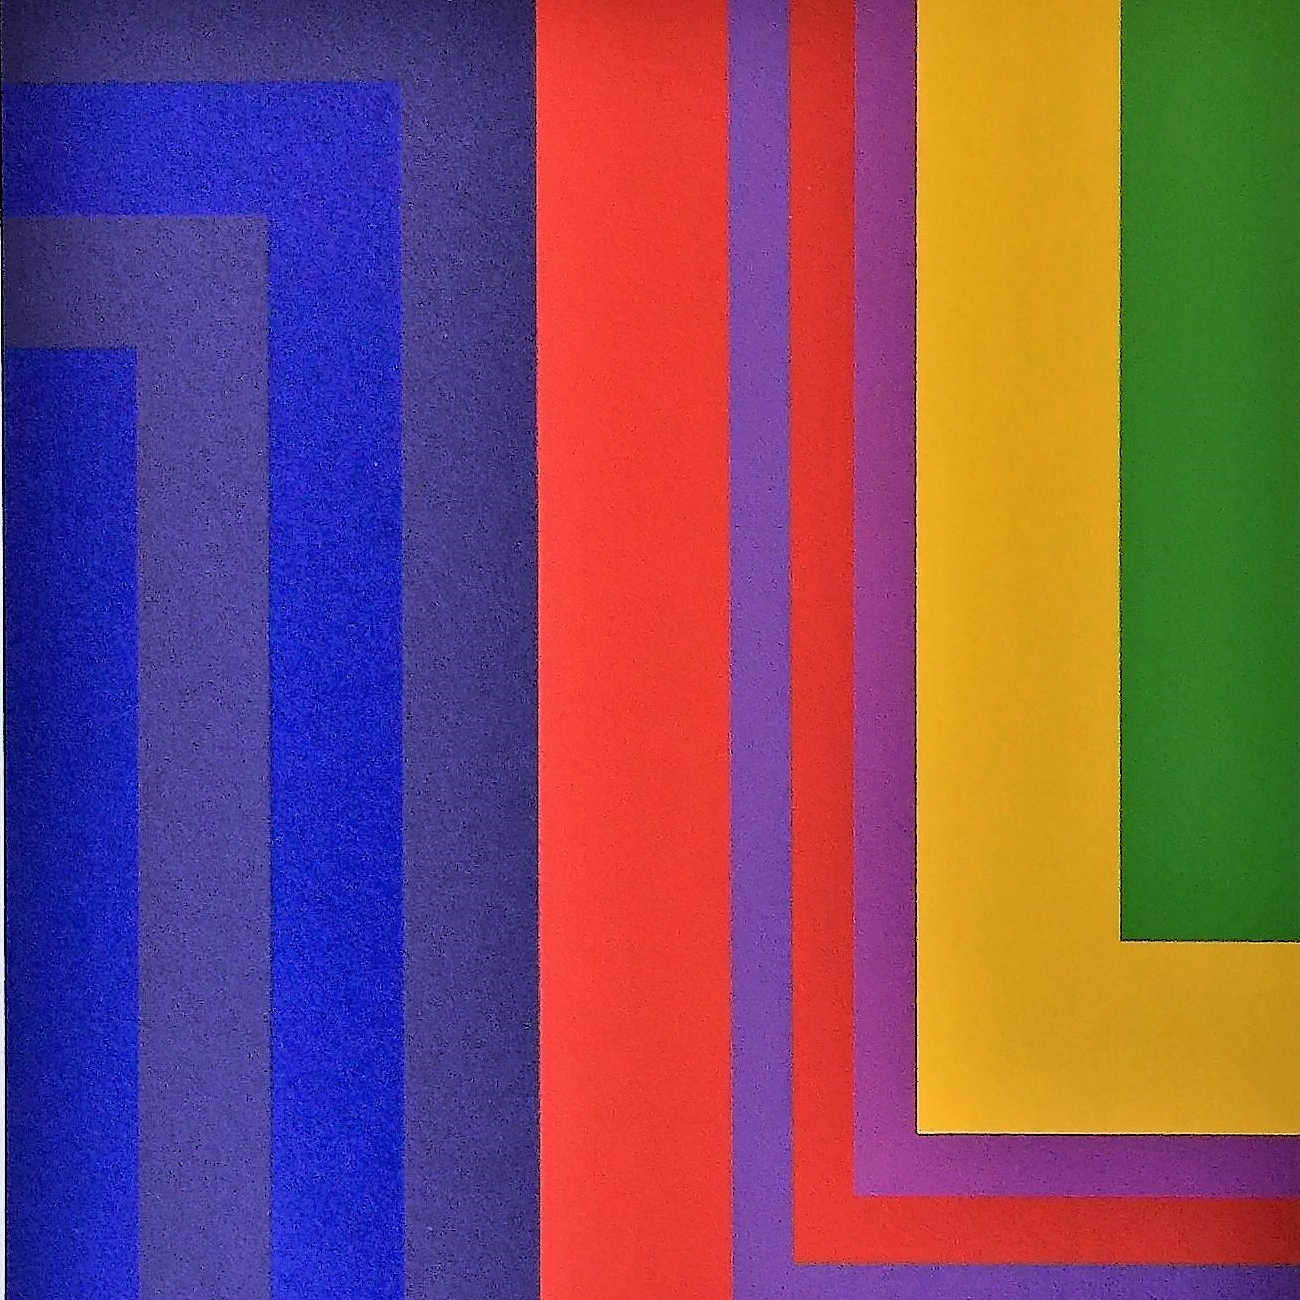 Untitled (L Form Geometric Construction in Blues, Red, Yellow, and Green)